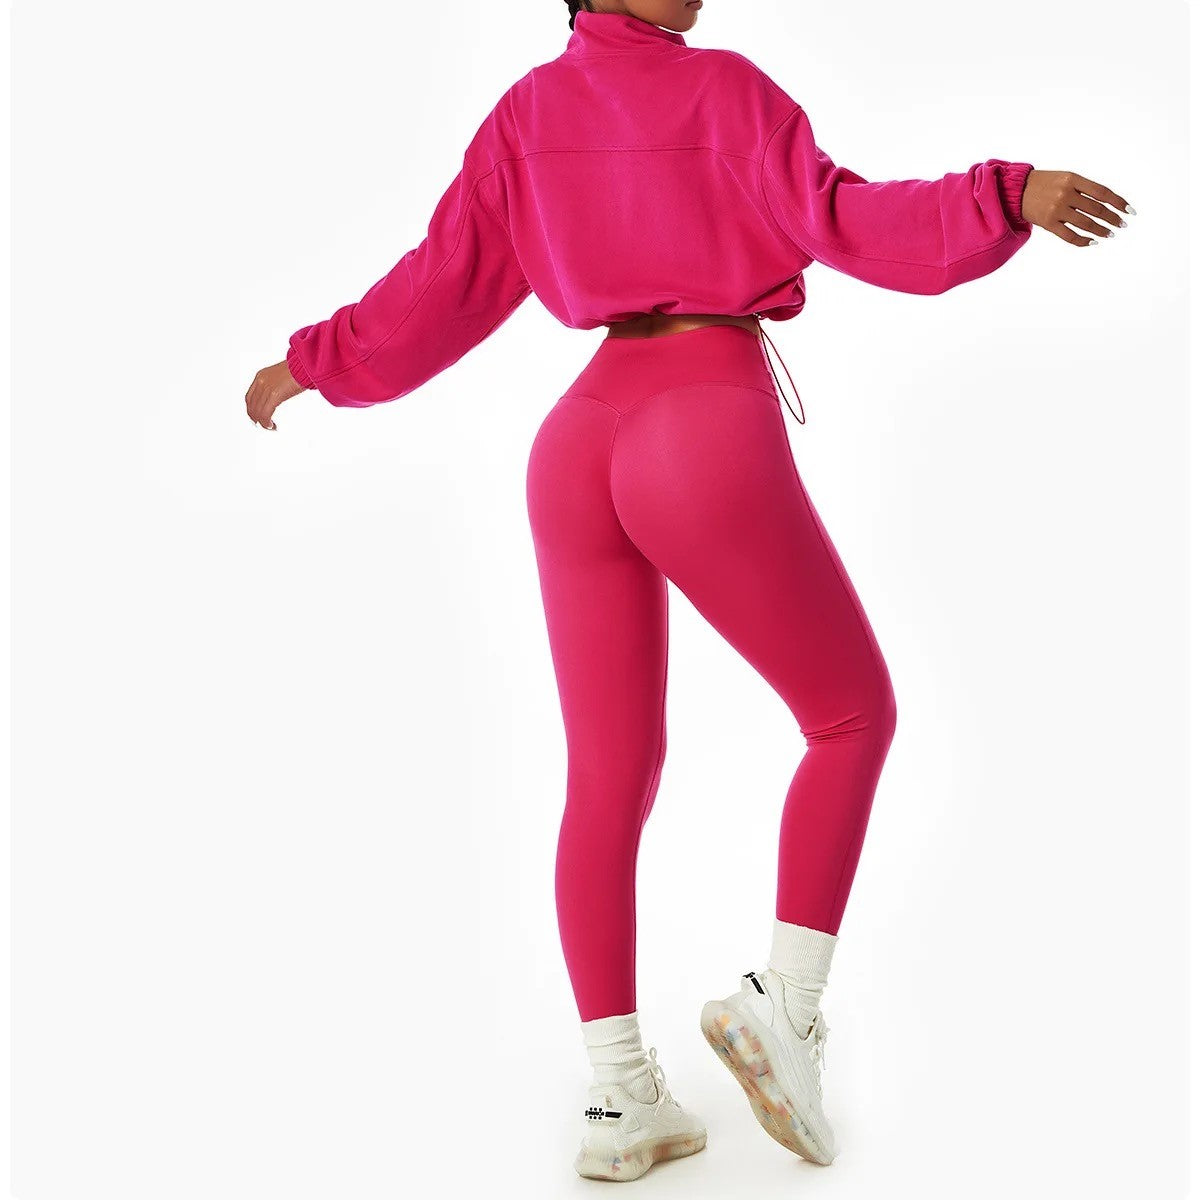 GymBabe Three Piece Set in Pink (Made with recycled material)